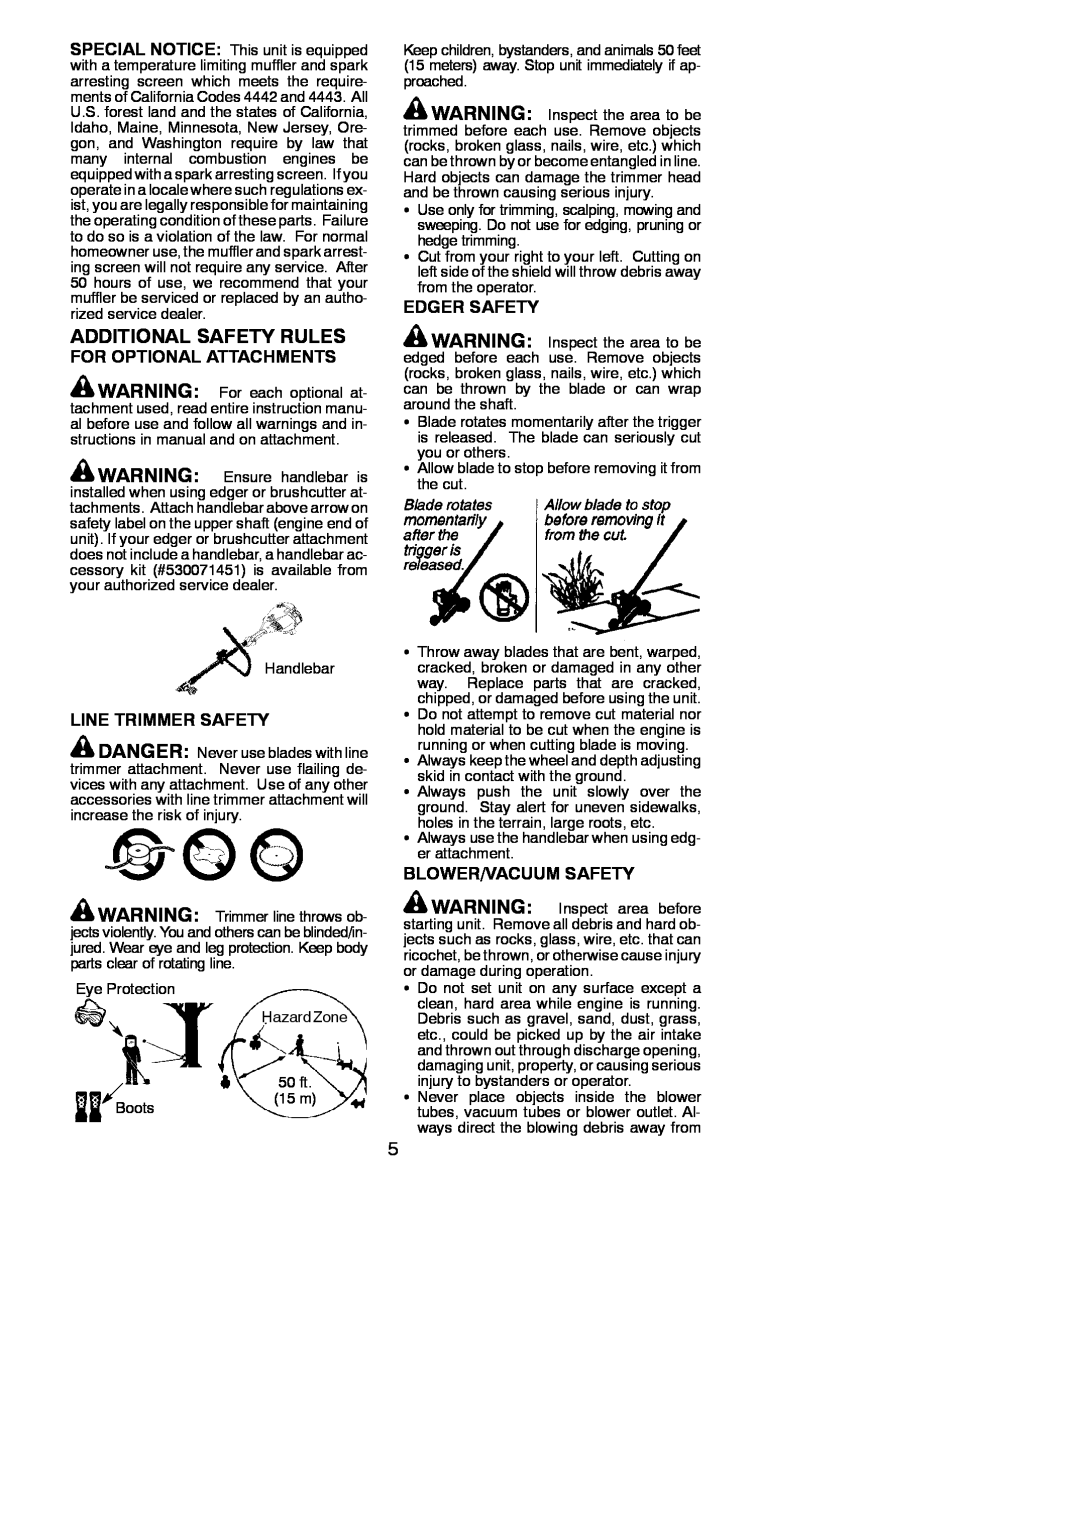 Poulan 530163735 instruction manual Additional Safety Rules, For Optional Attachments, Line Trimmer Safety, Edger Safety 